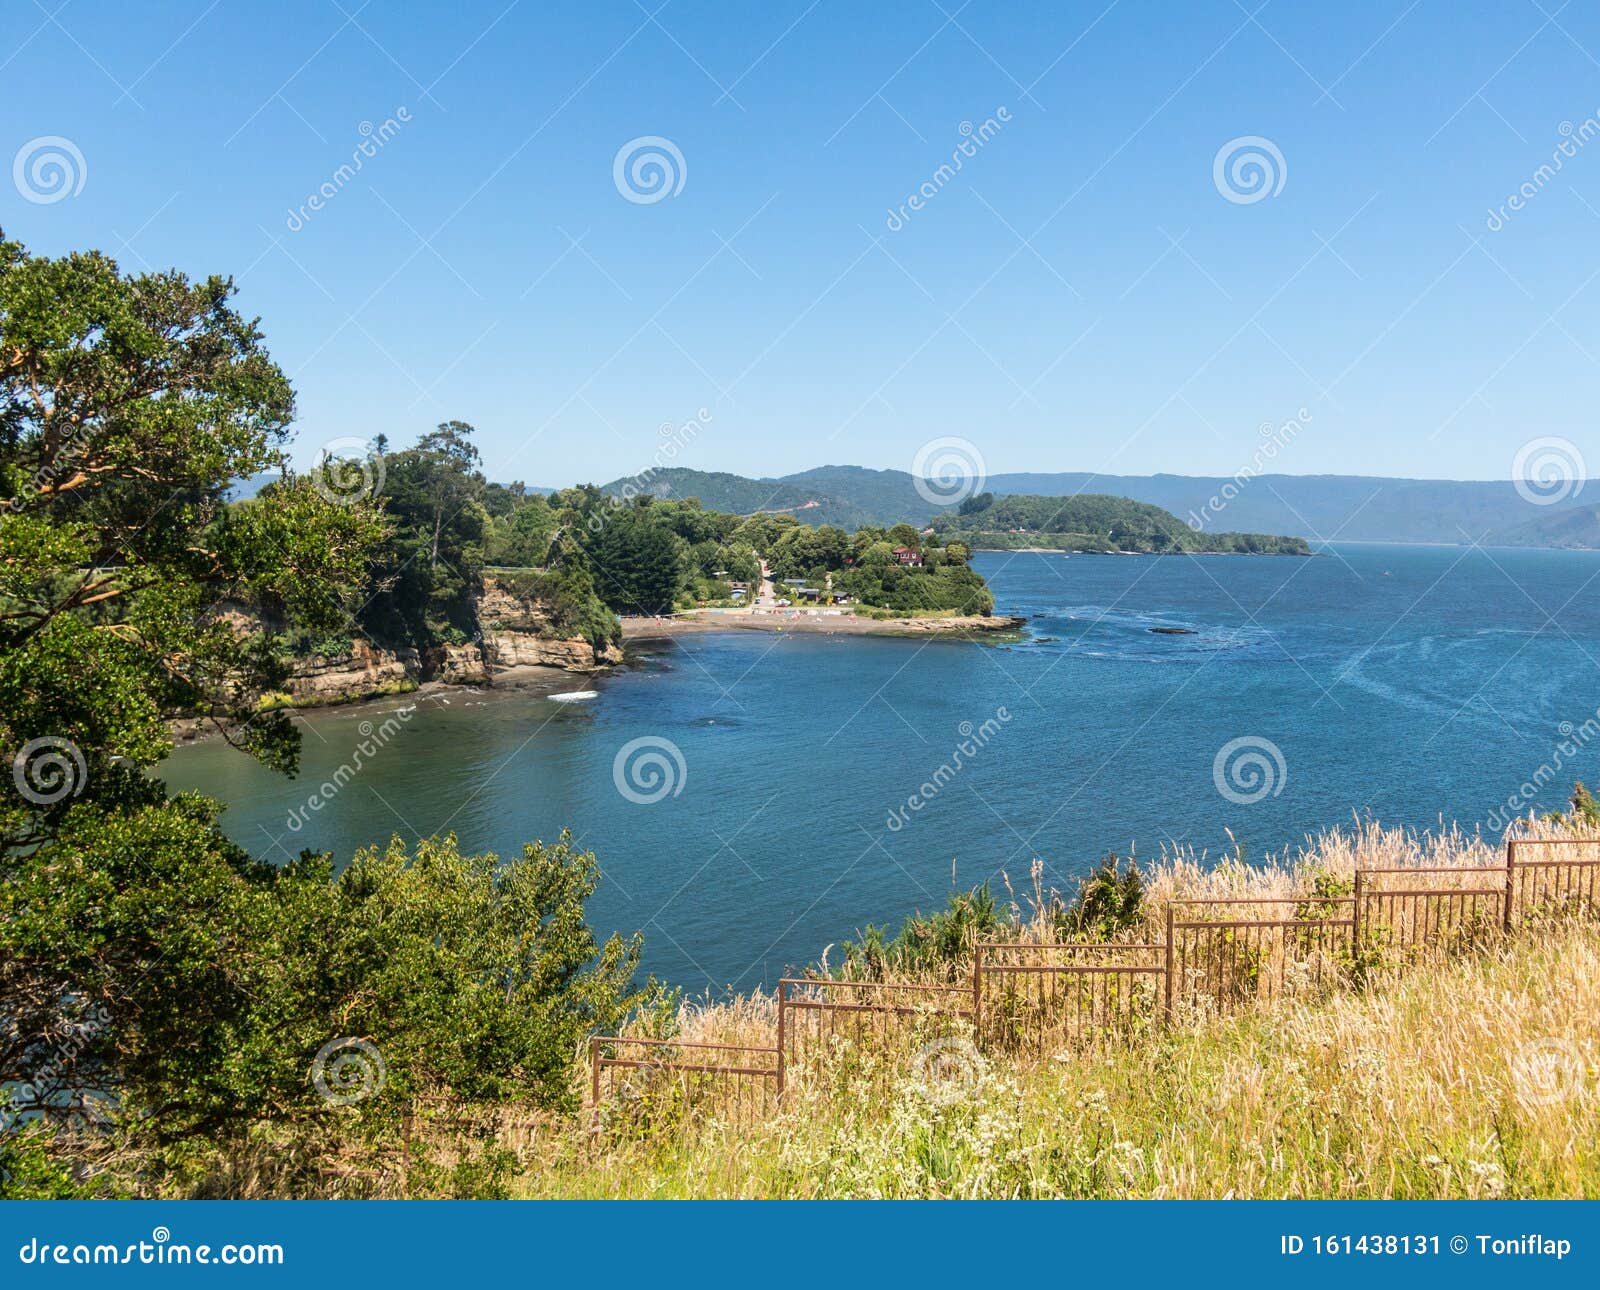 seaside view in the spanish fortress in niebla, valdivia, patagonia, chile